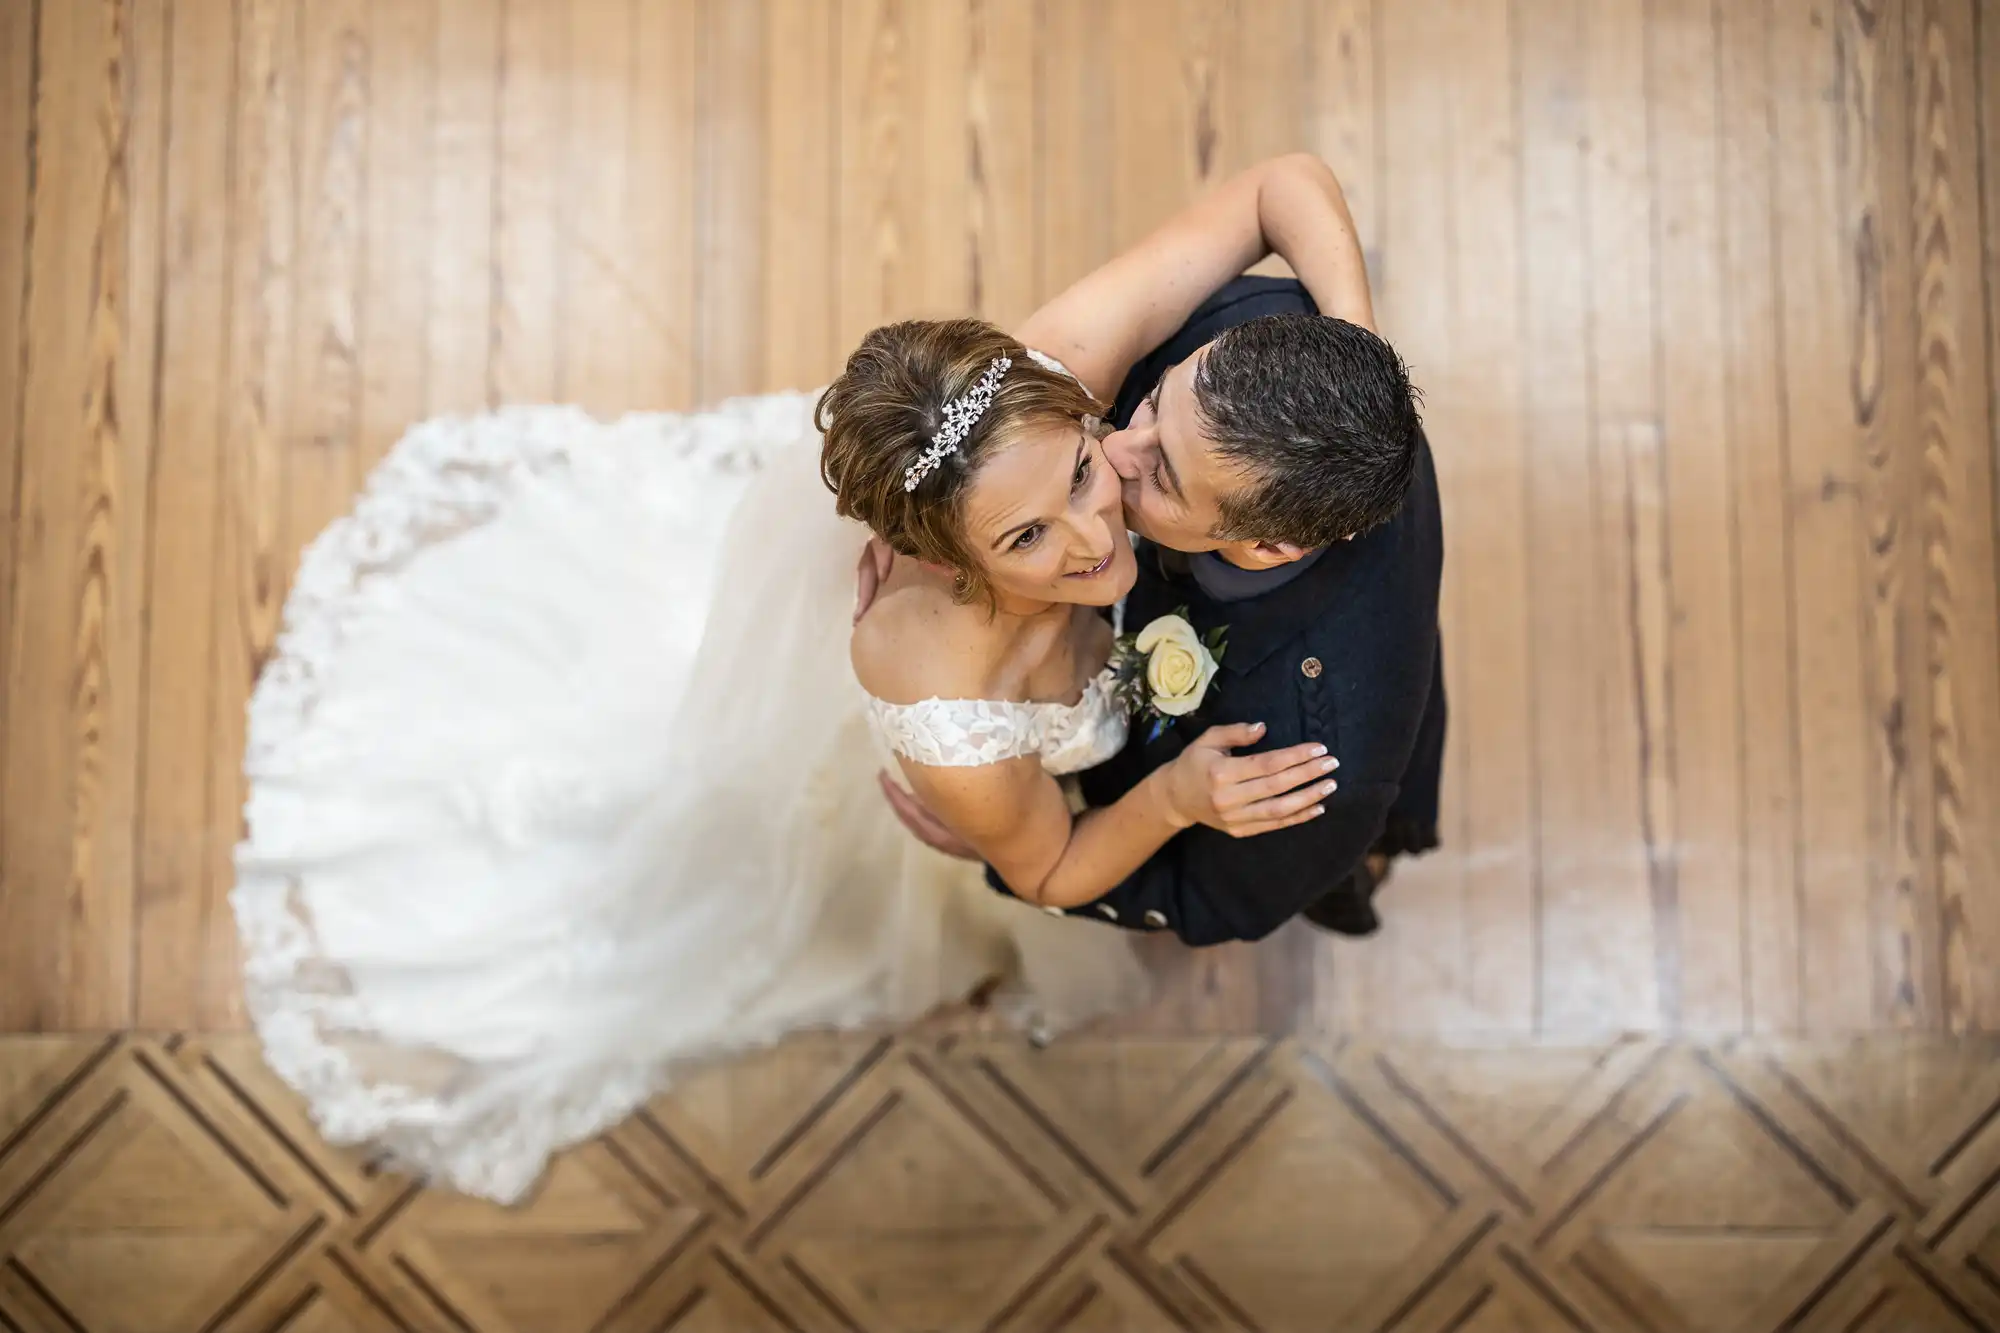 A bride and groom share a dance on a wooden floor, captured from above. The bride wears a white dress and headpiece, while the groom is in a dark suit with a boutonnière.